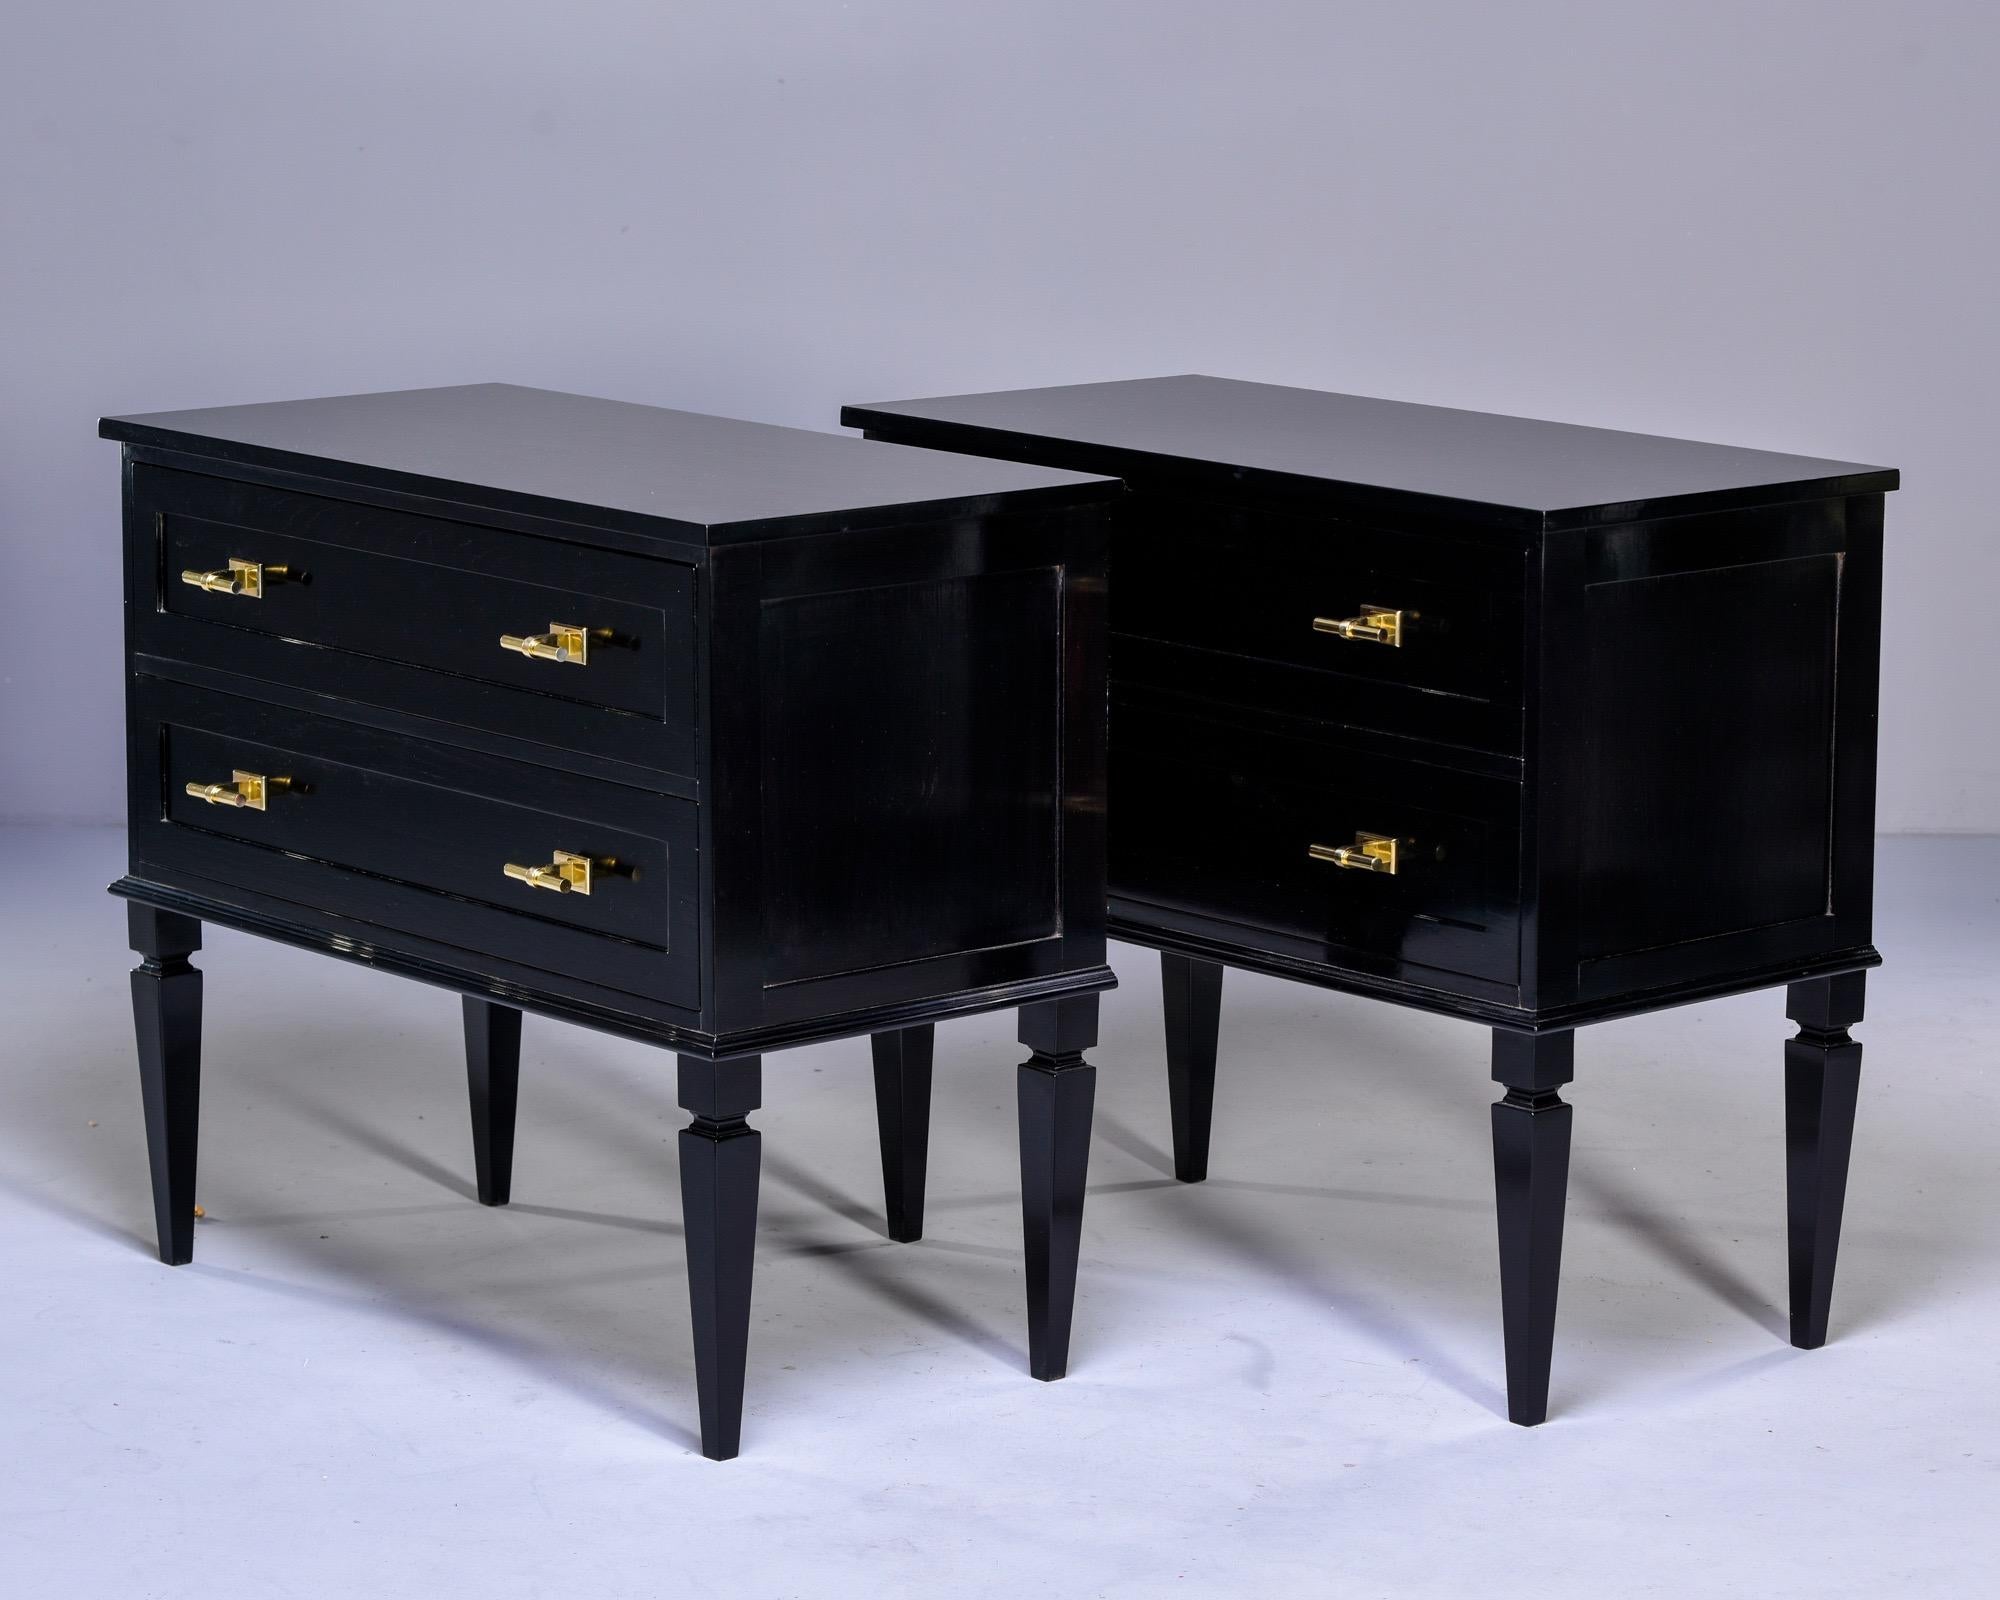 Custom made for us in England, this pair of two drawer chests is made from mahogany with an ebonized finish. Handsome brass hardware, dovetail construction, and tapered legs contribute to Classic and high quality style that pairs well with a variety